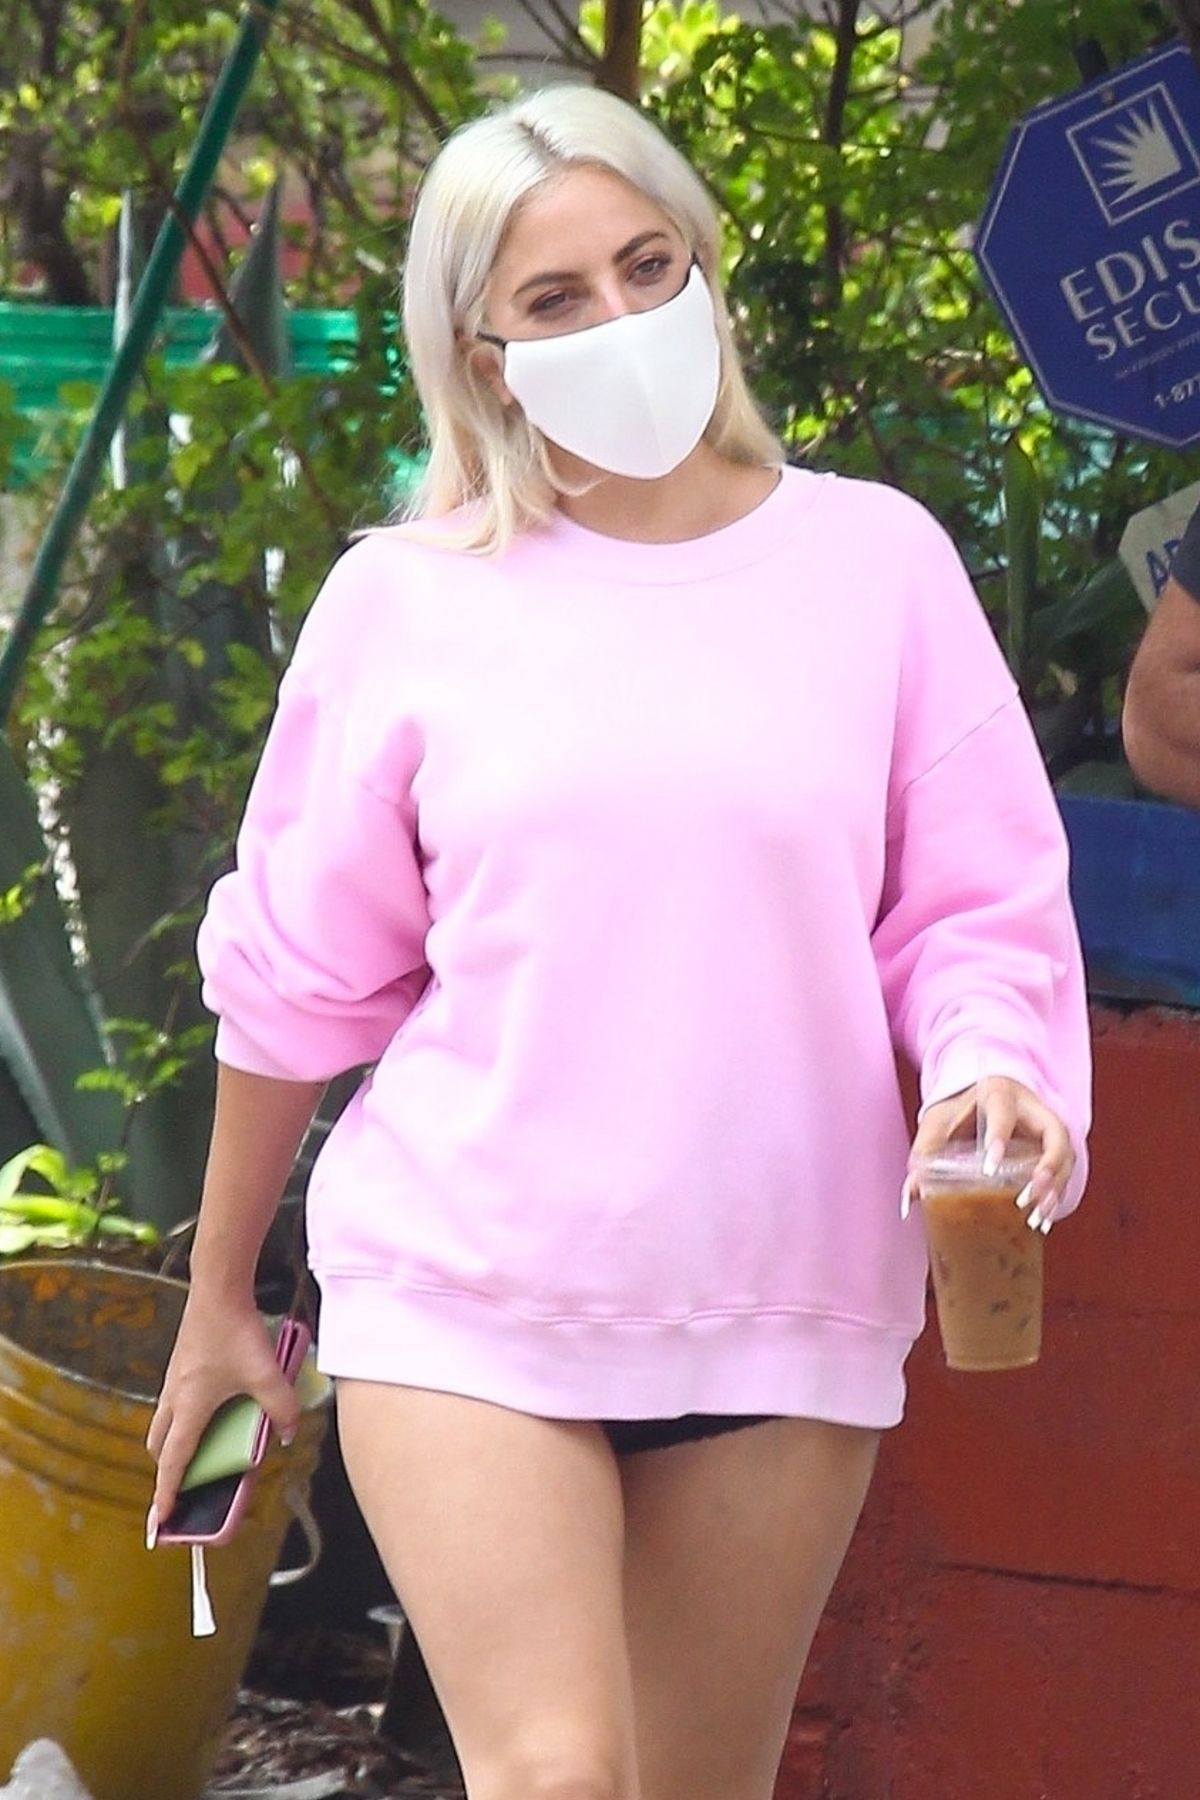 LADY GAGA Out in Hollywood Hills 06/19/2020 – HawtCelebs